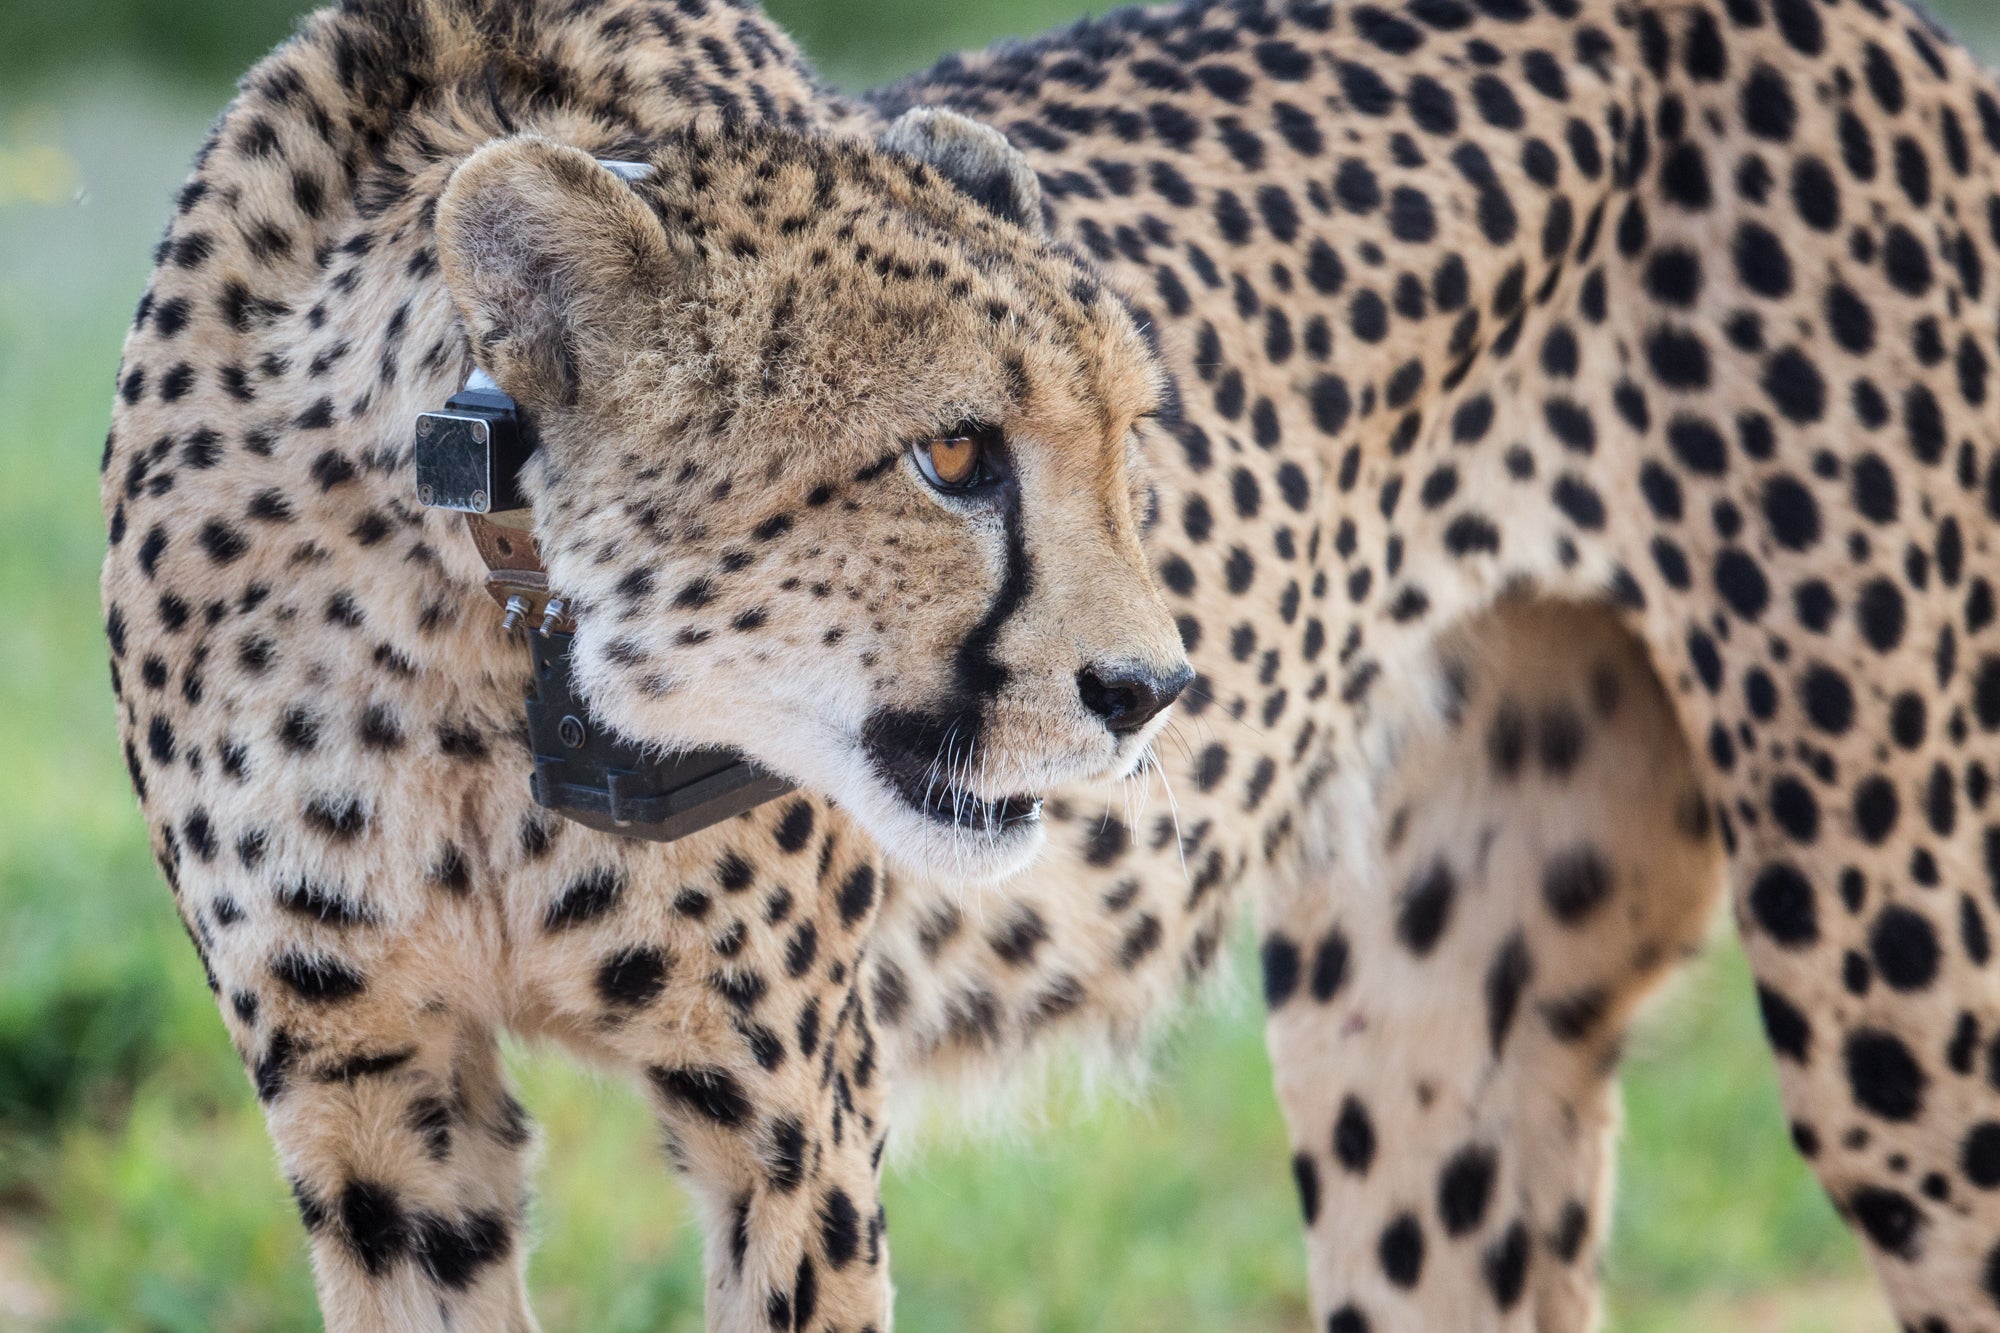 A Namibian cheetah set to enter India on September 17 fitted with satellite collar seen in the wild. A total of eight cheetahs are being flown down from Namibia to central India’s Kuno national park in an 11-hour journey marking the wild animal’s translocation project